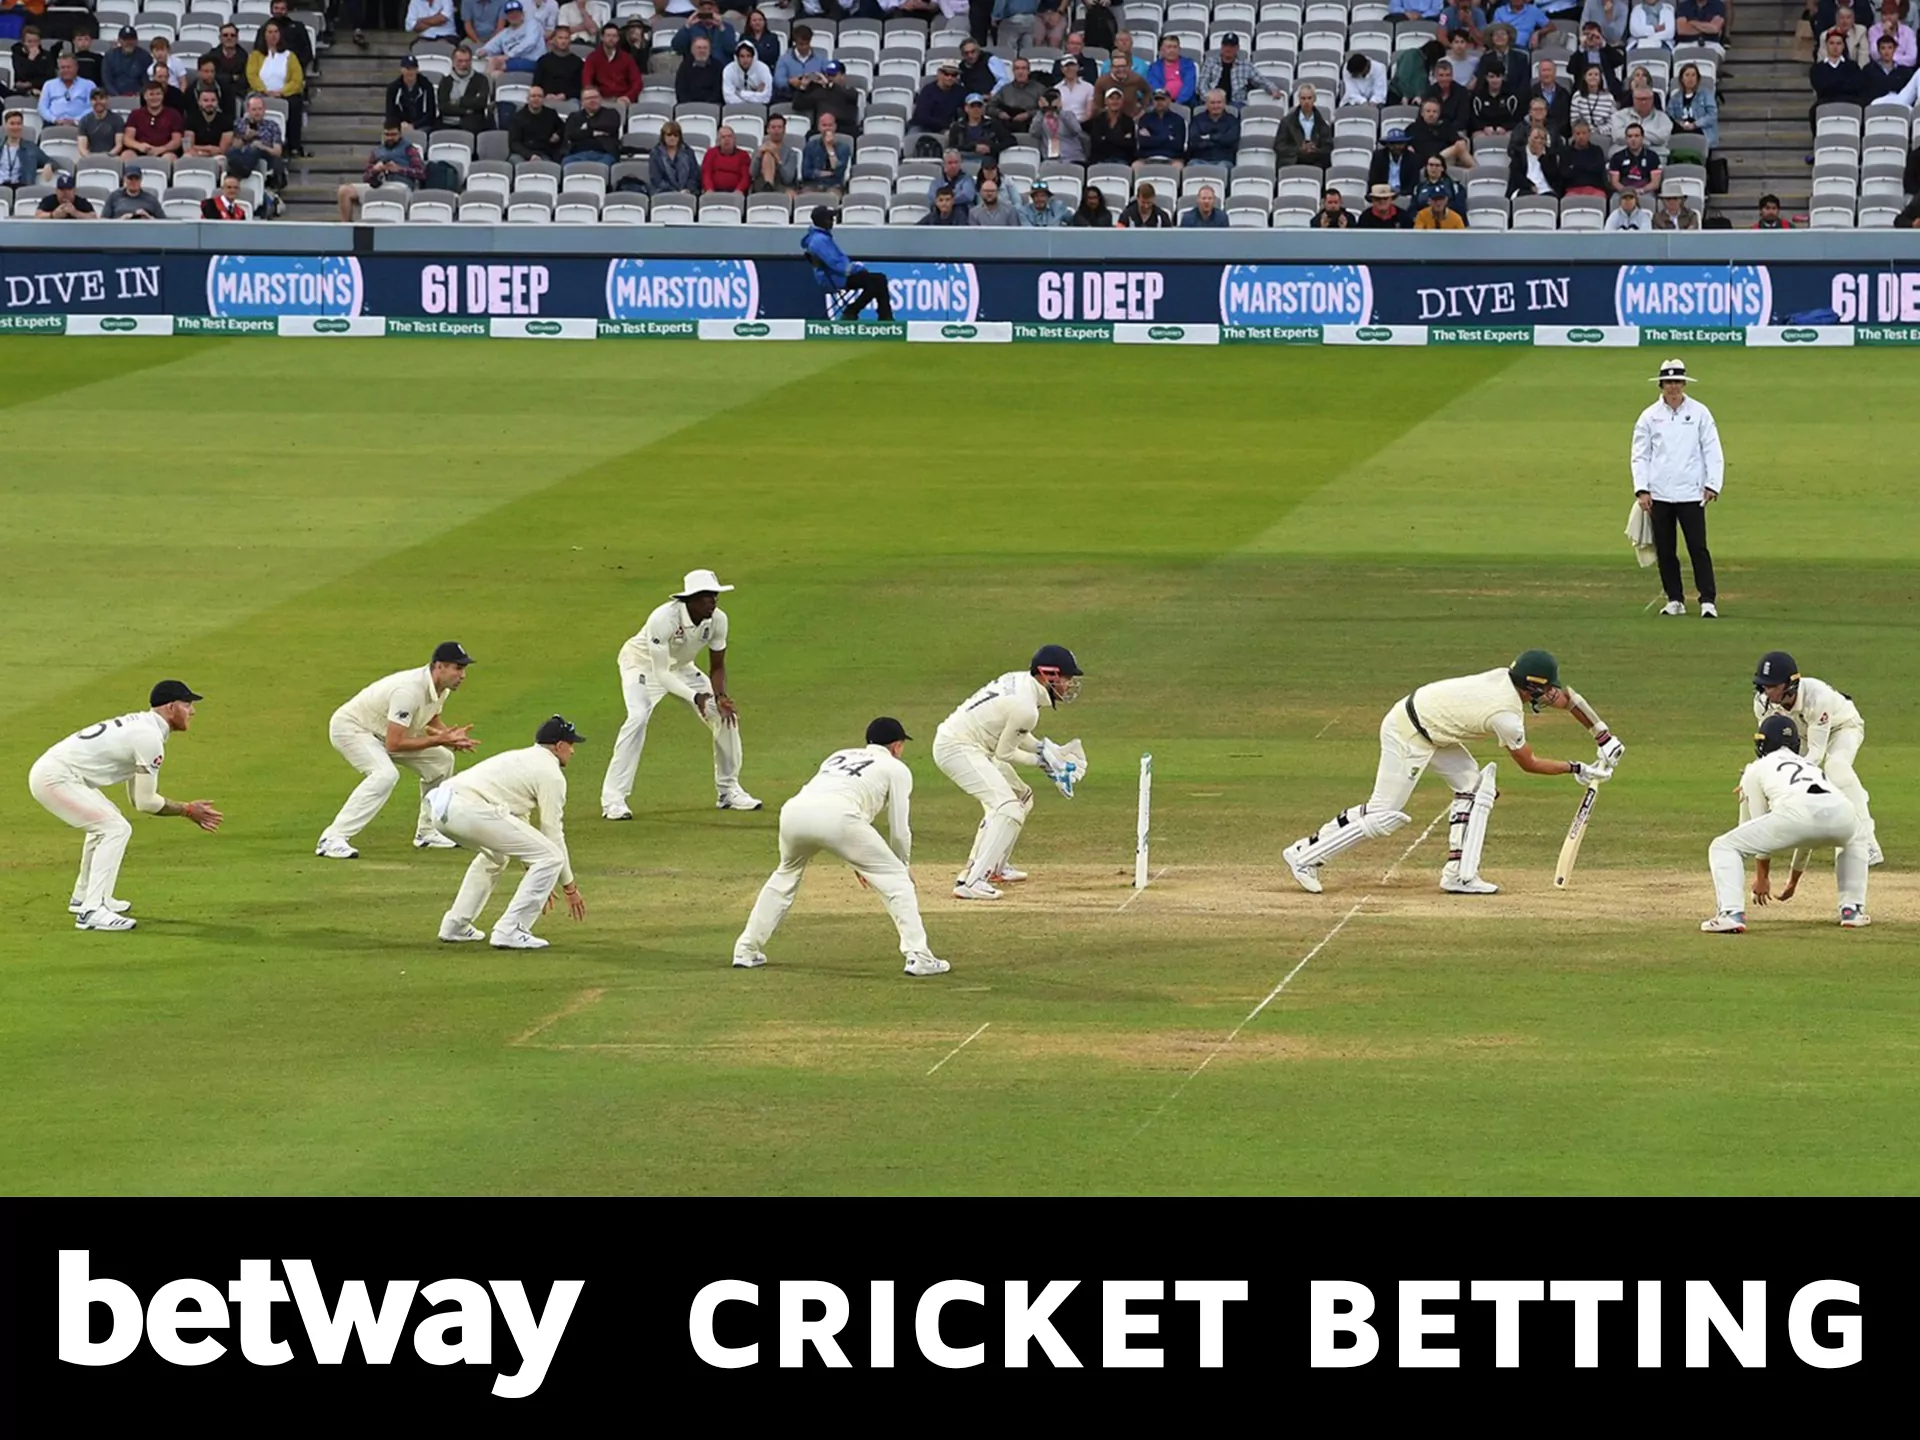 Cricket betting on Betway.